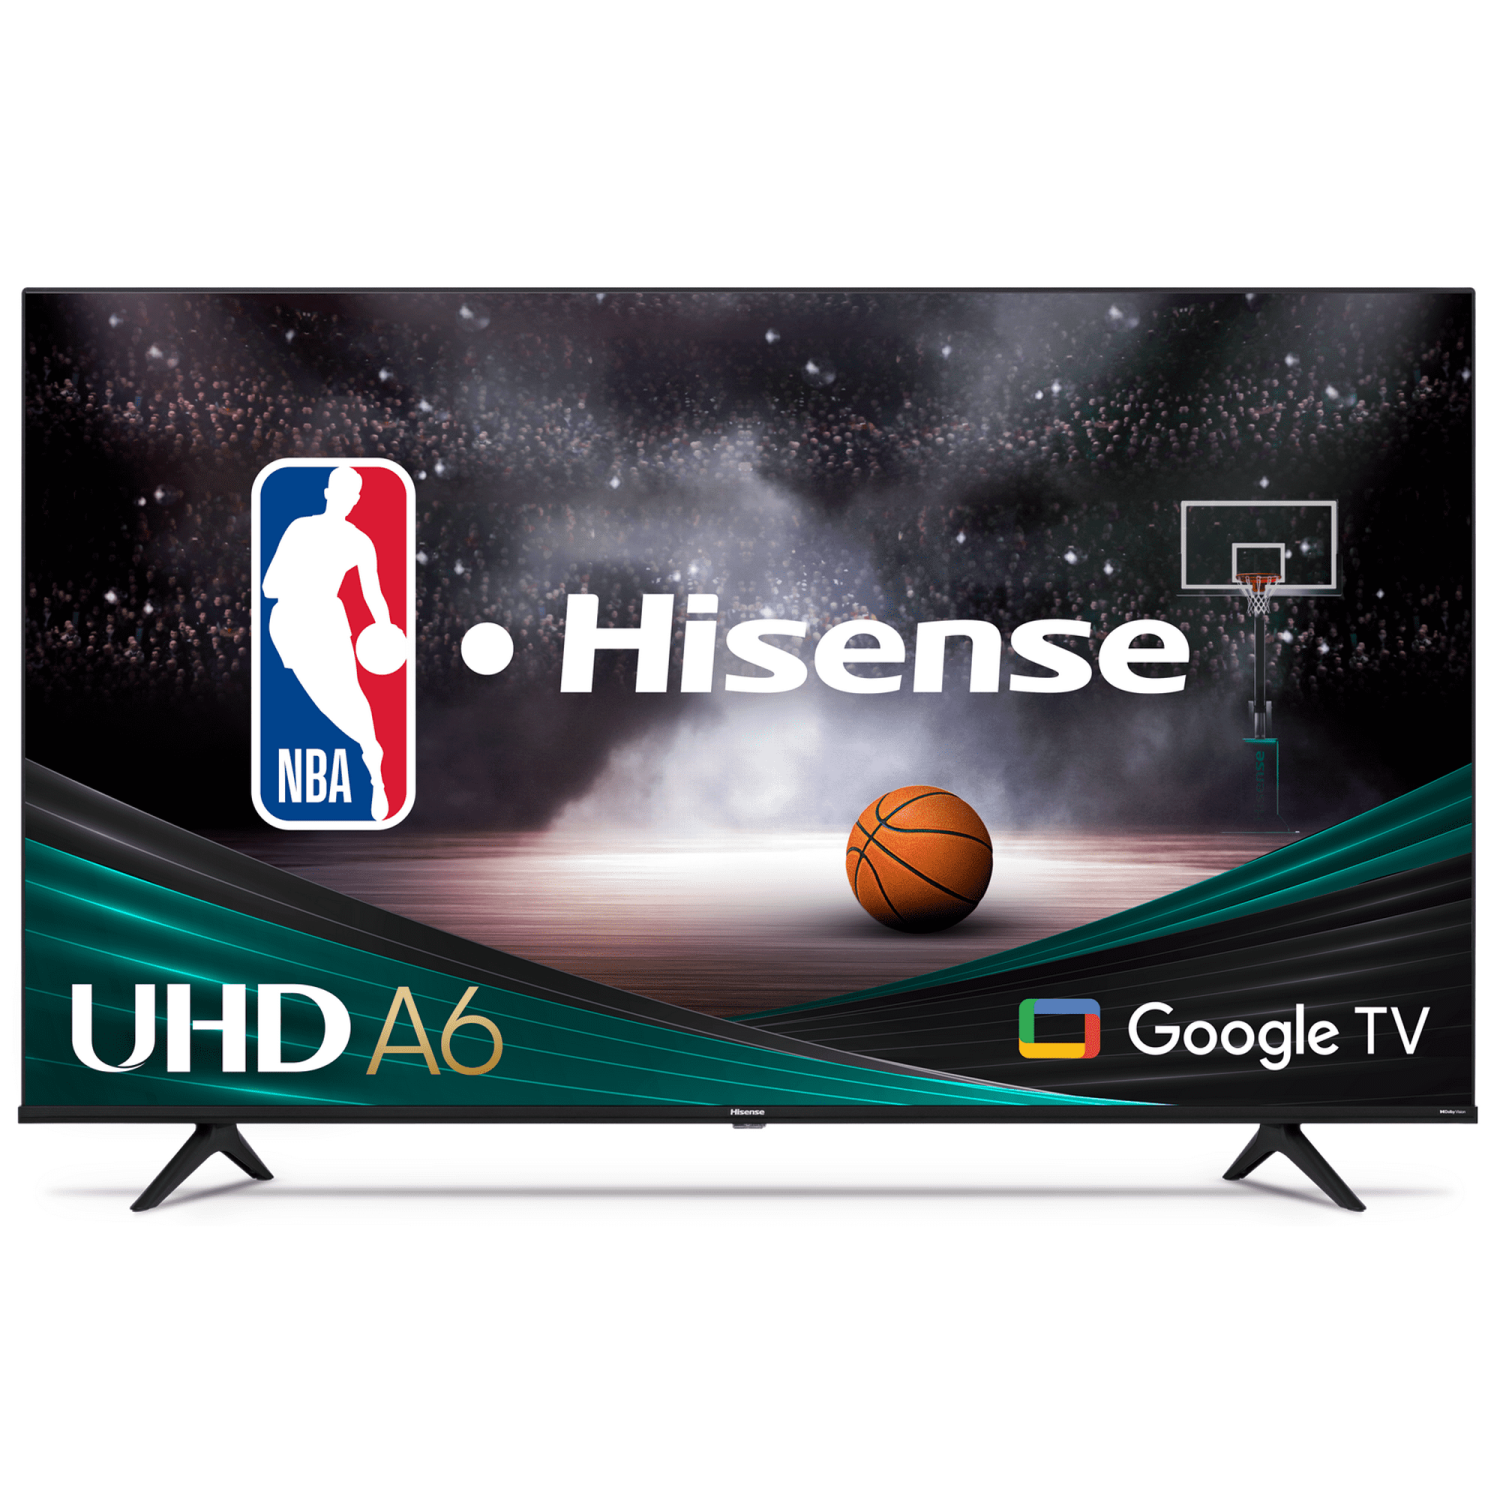 REFURBISHED (GOOD) - Hisense 65" Class 4K UHD Google Smart TV HDR A6H Series (65A6H)**LOCAL VANCOUVER DELIVERY ONLY**